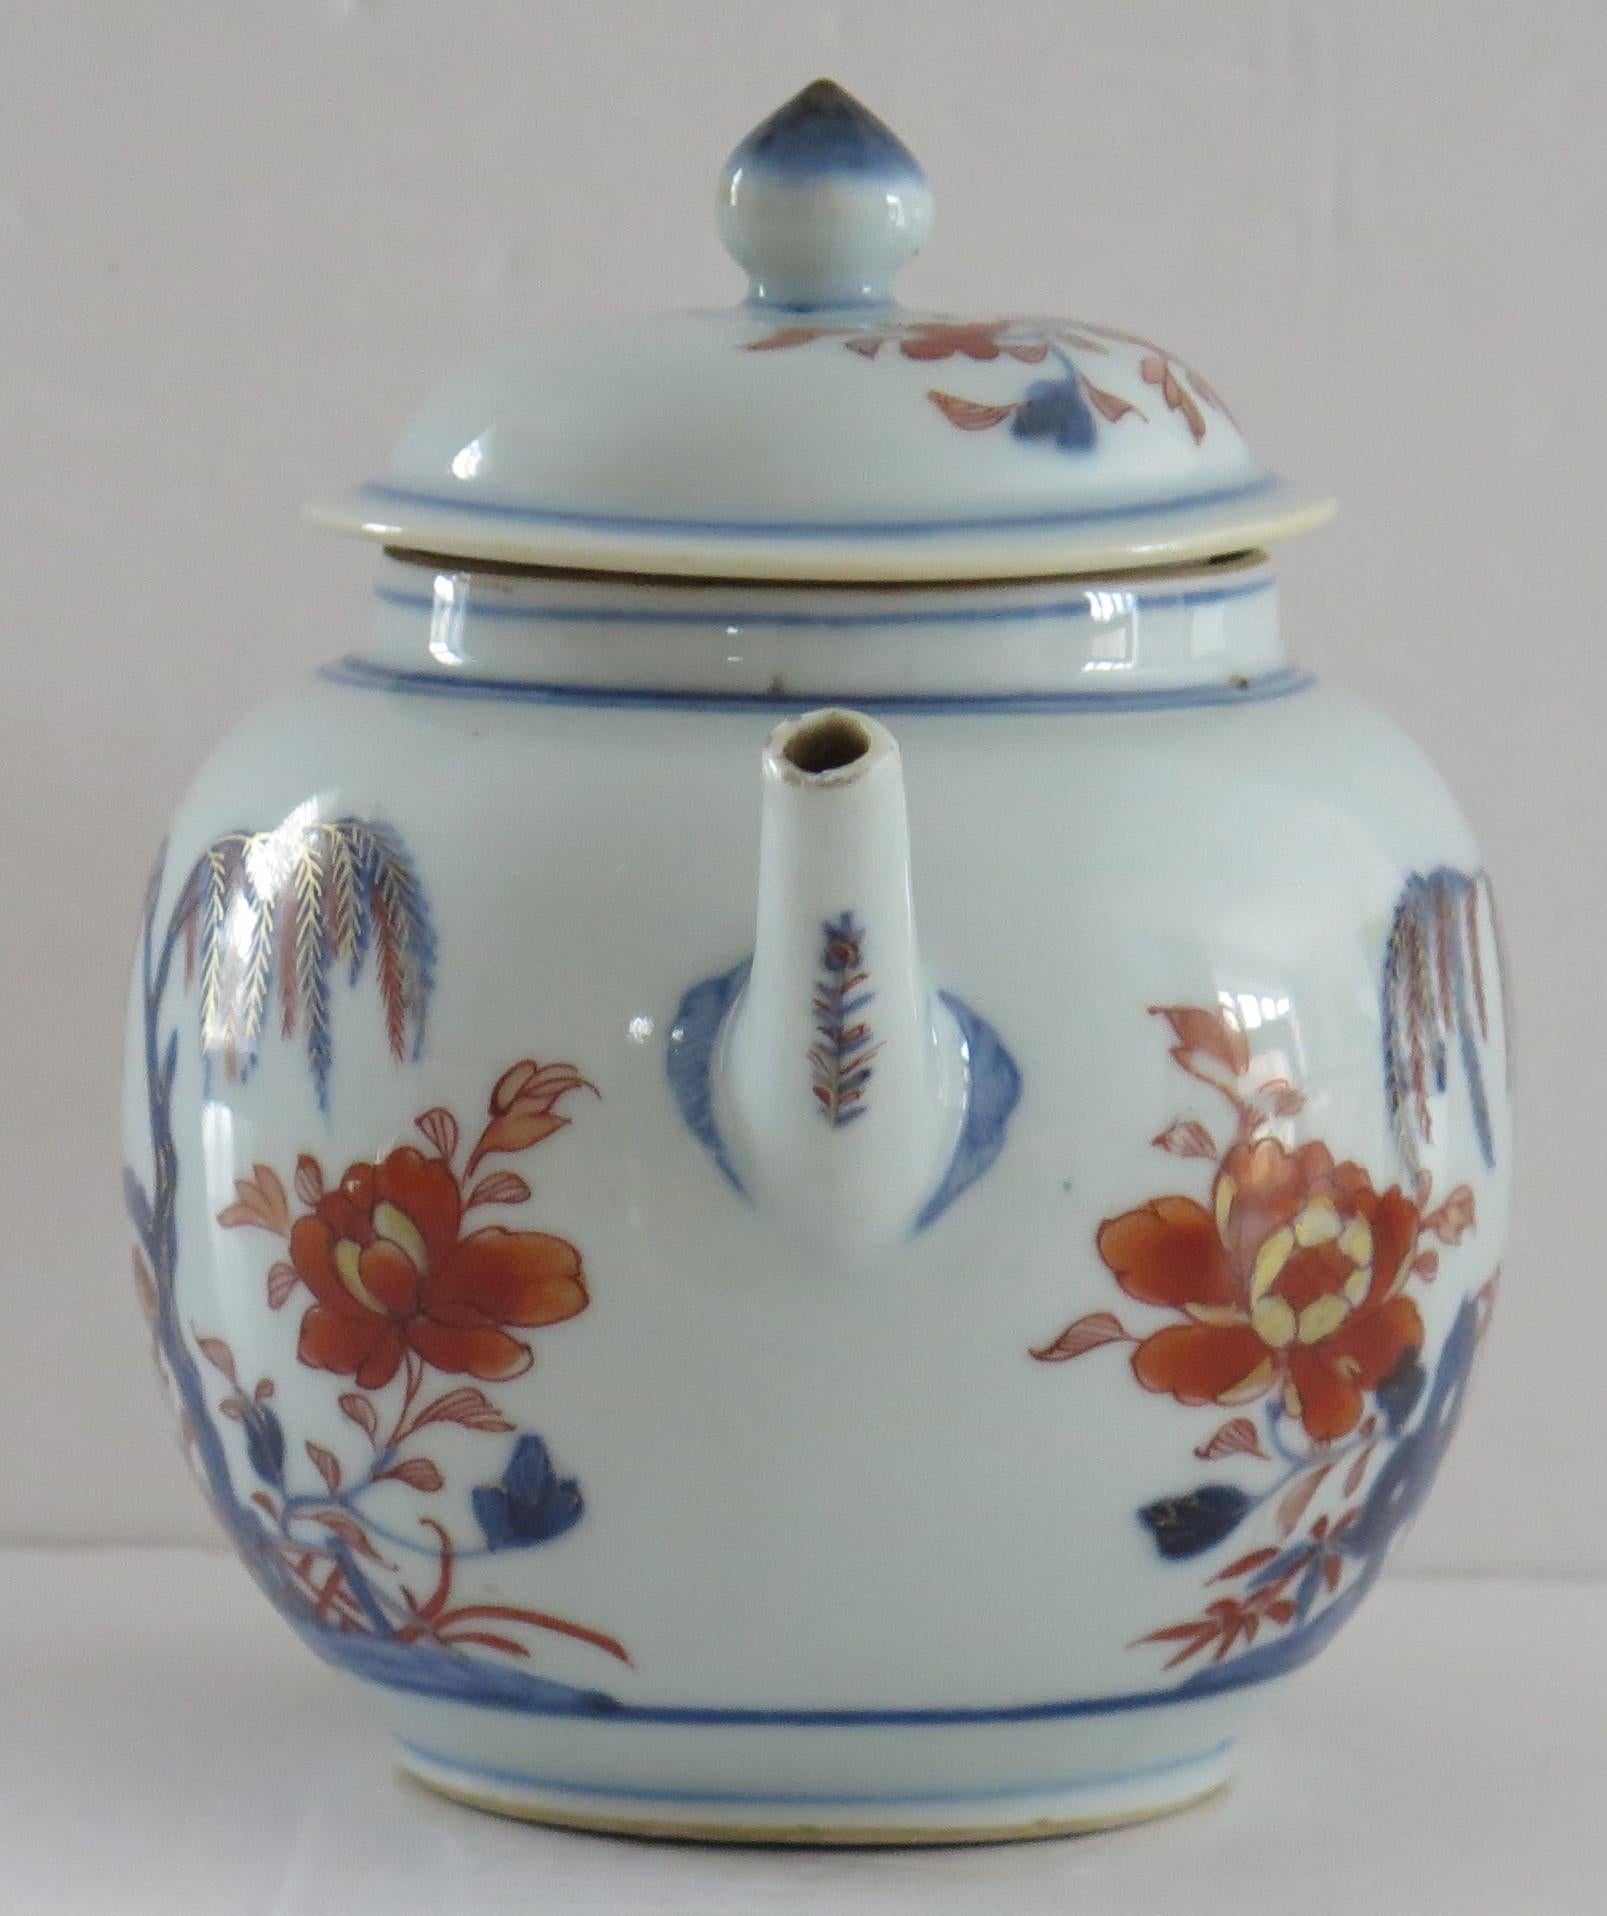 Chinese Export Kangxi Period Teapot Hand Painted Imari Pattern, Circa 1710 In Good Condition For Sale In Lincoln, Lincolnshire